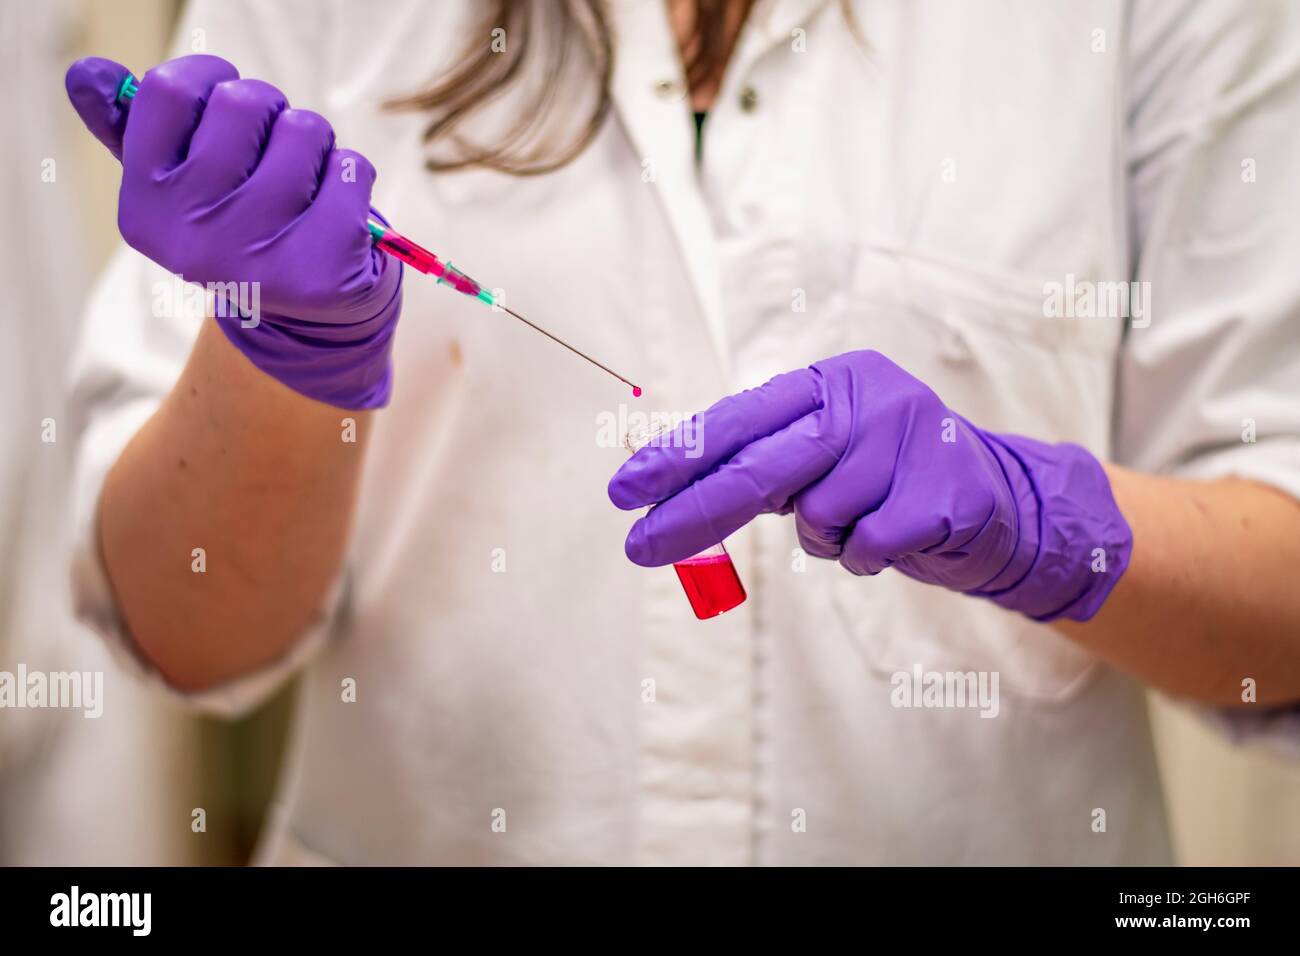 An european researcher adding toxic reagent carefully in a chemistry laboratory wearing gloves and lab coat as protective measure for virus research Stock Photo